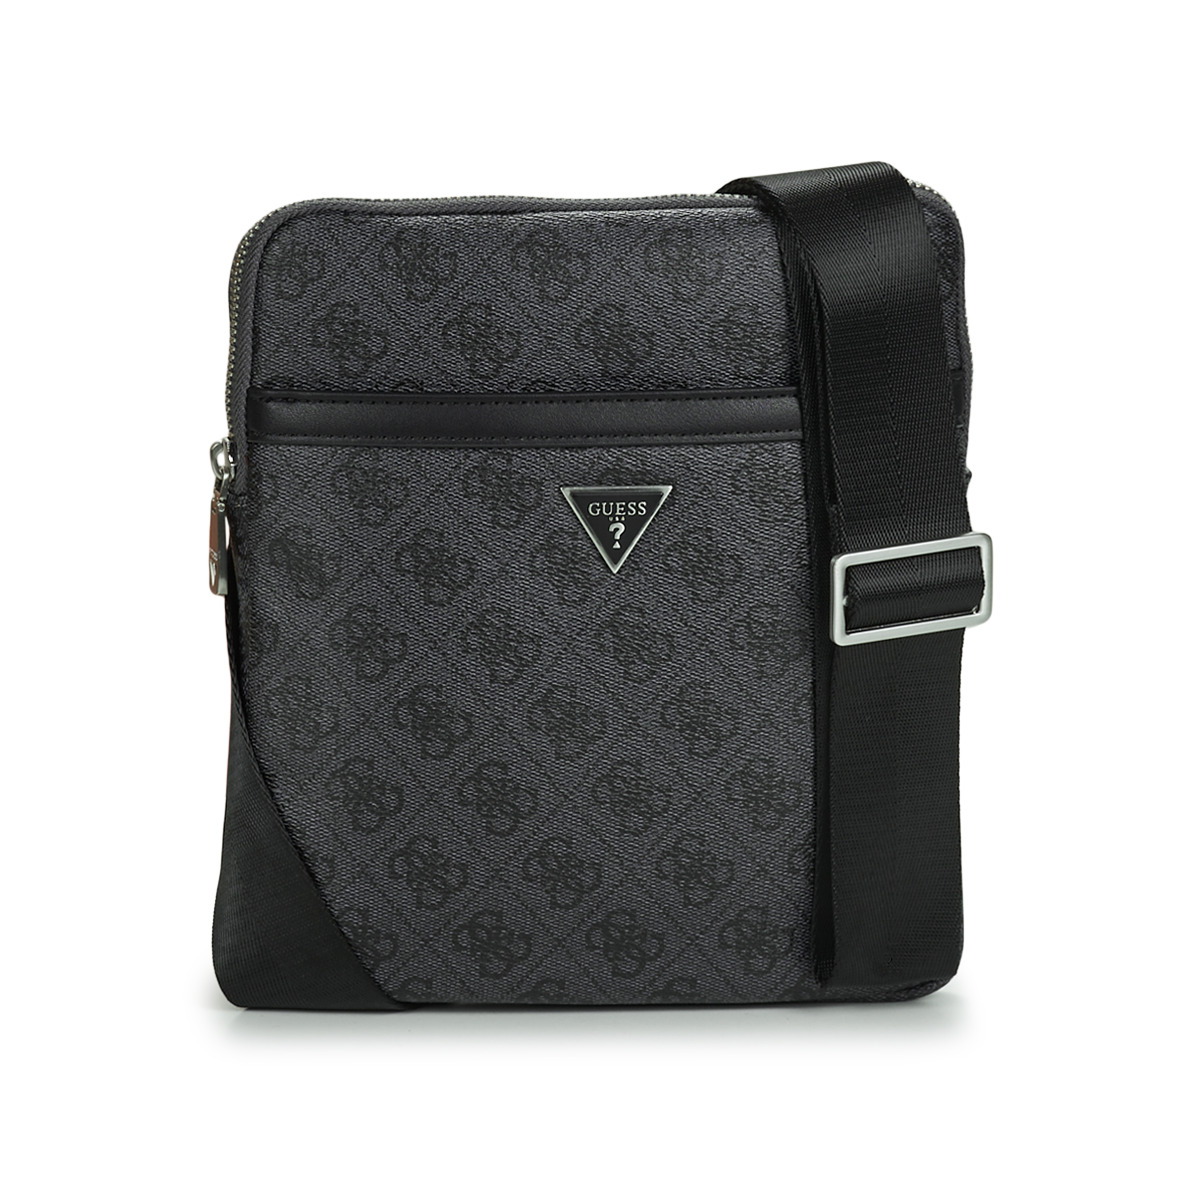 Guess VEZZOLA ECO MINI-BAGS Black / Grey - Fast delivery